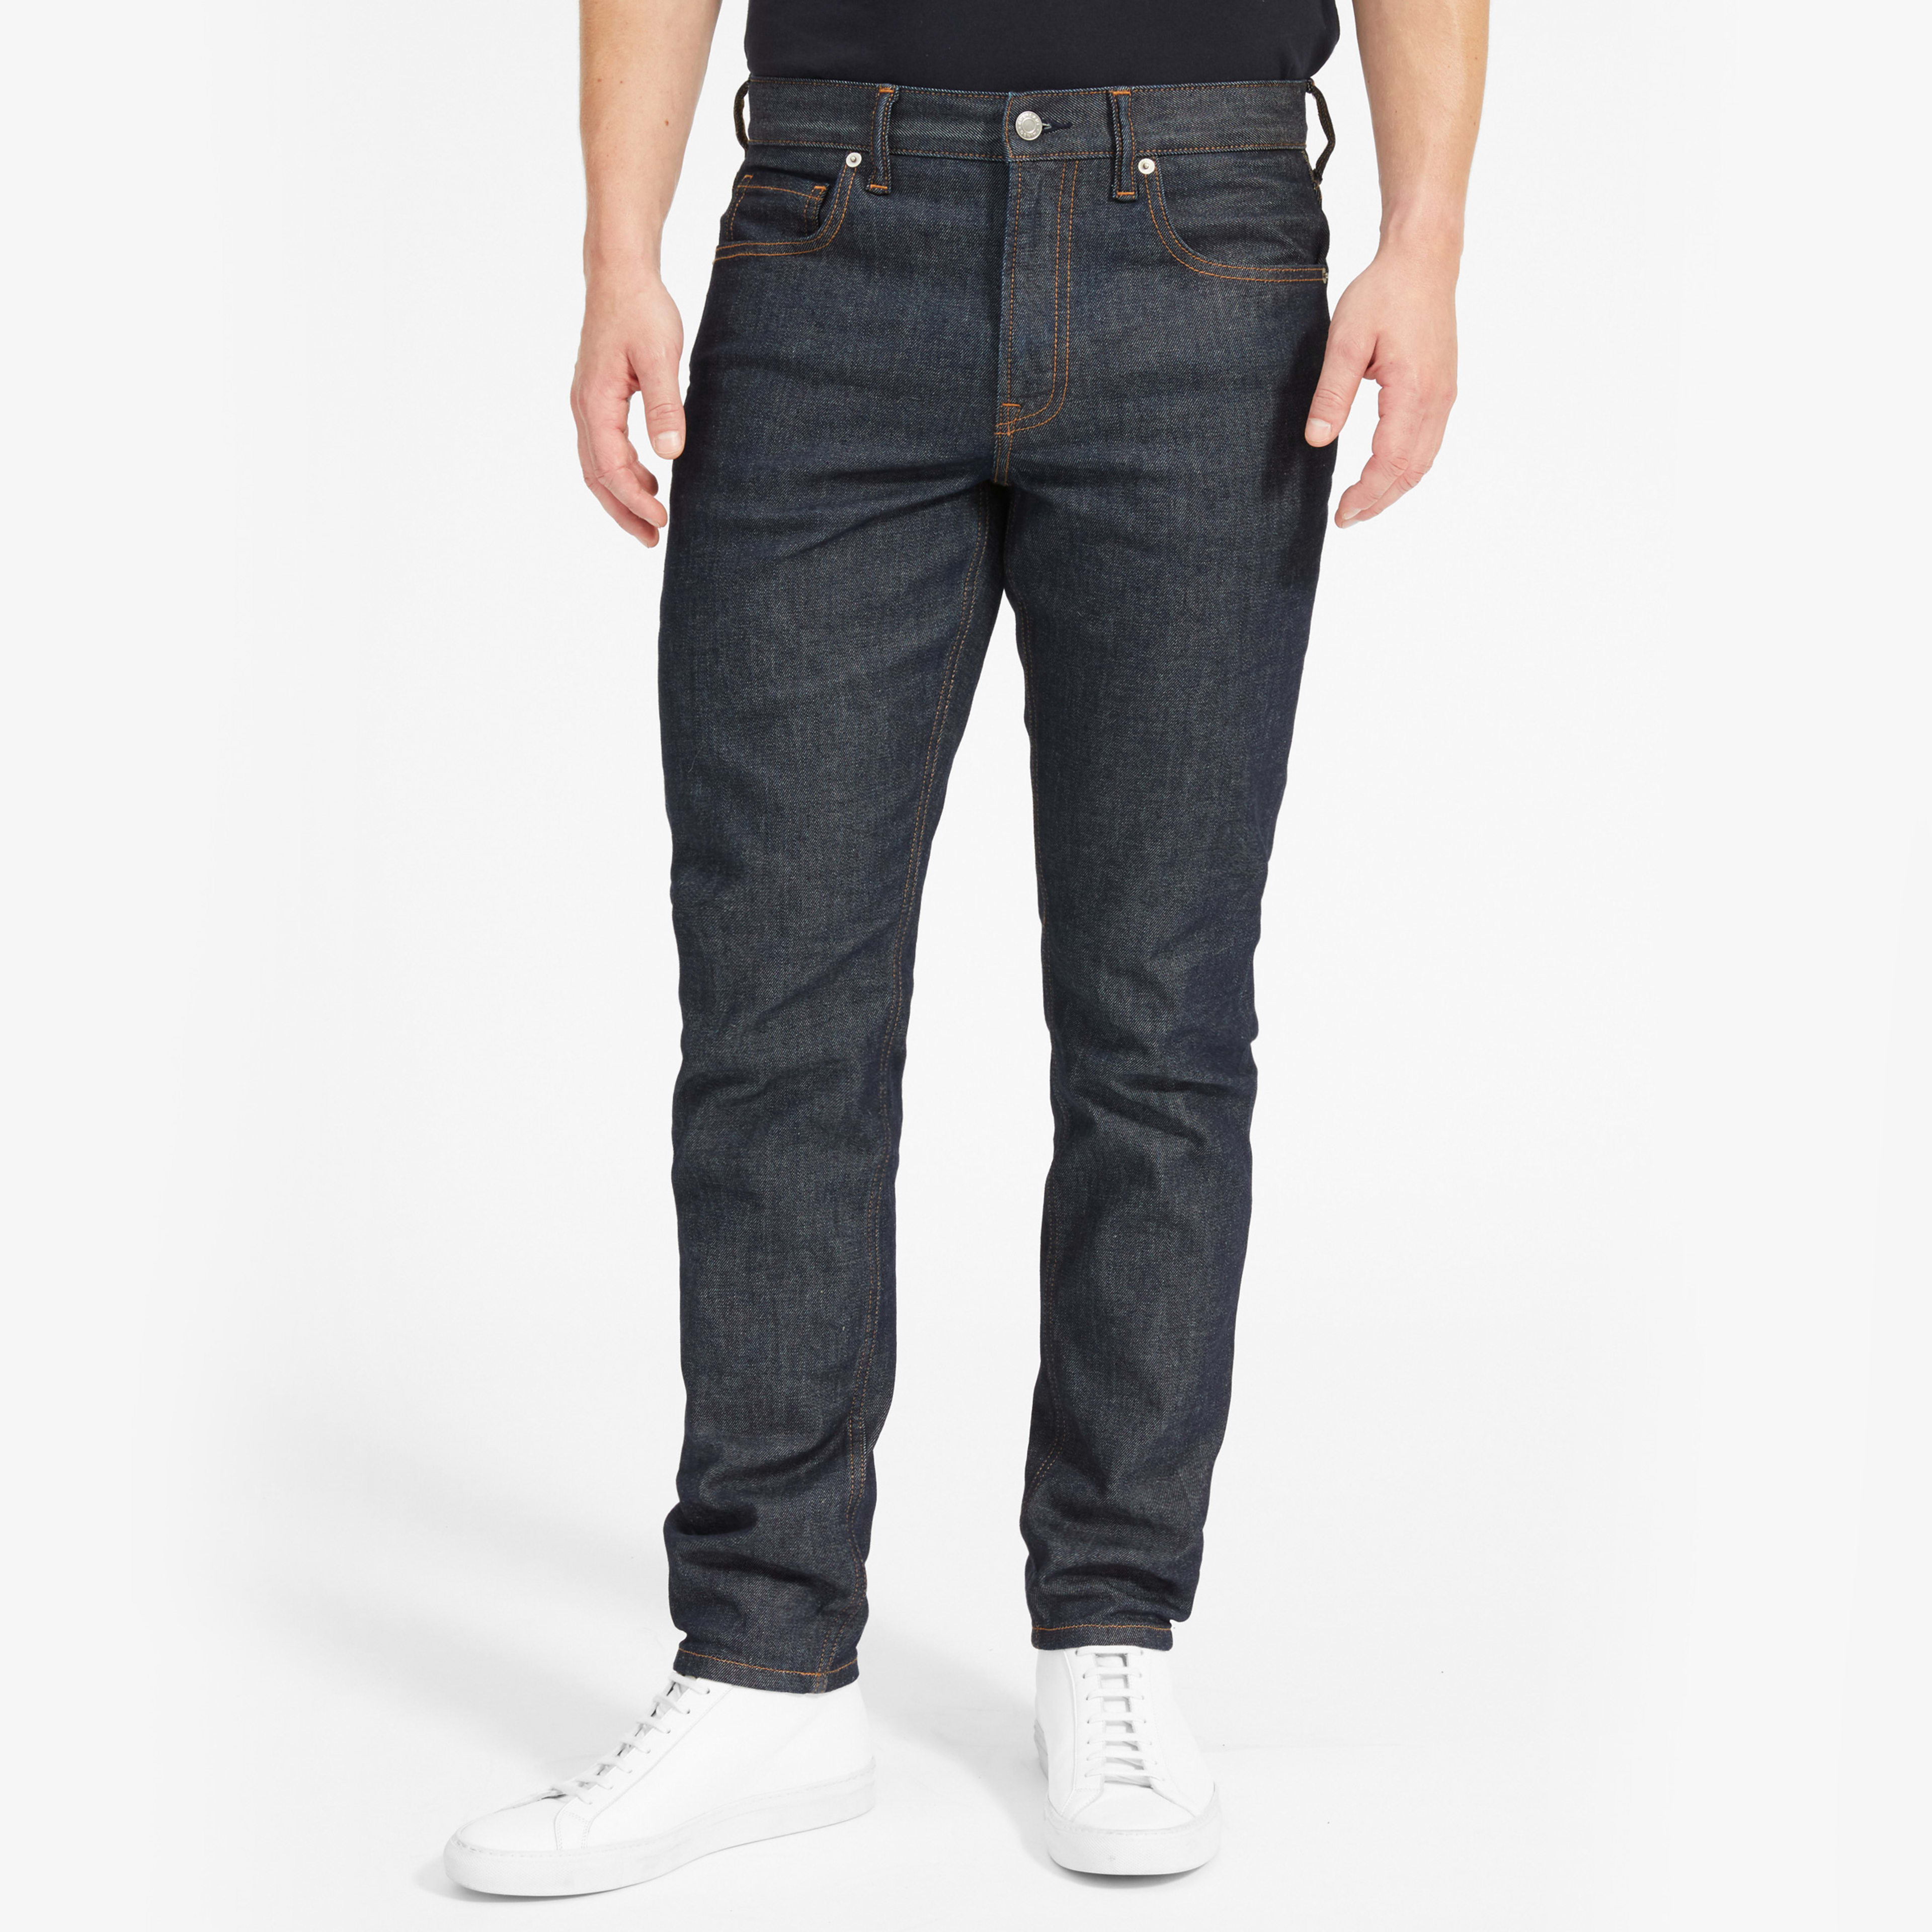 The Athletic Fit Jean - Washed Black, M-BTM-DNM-PNT-ATH